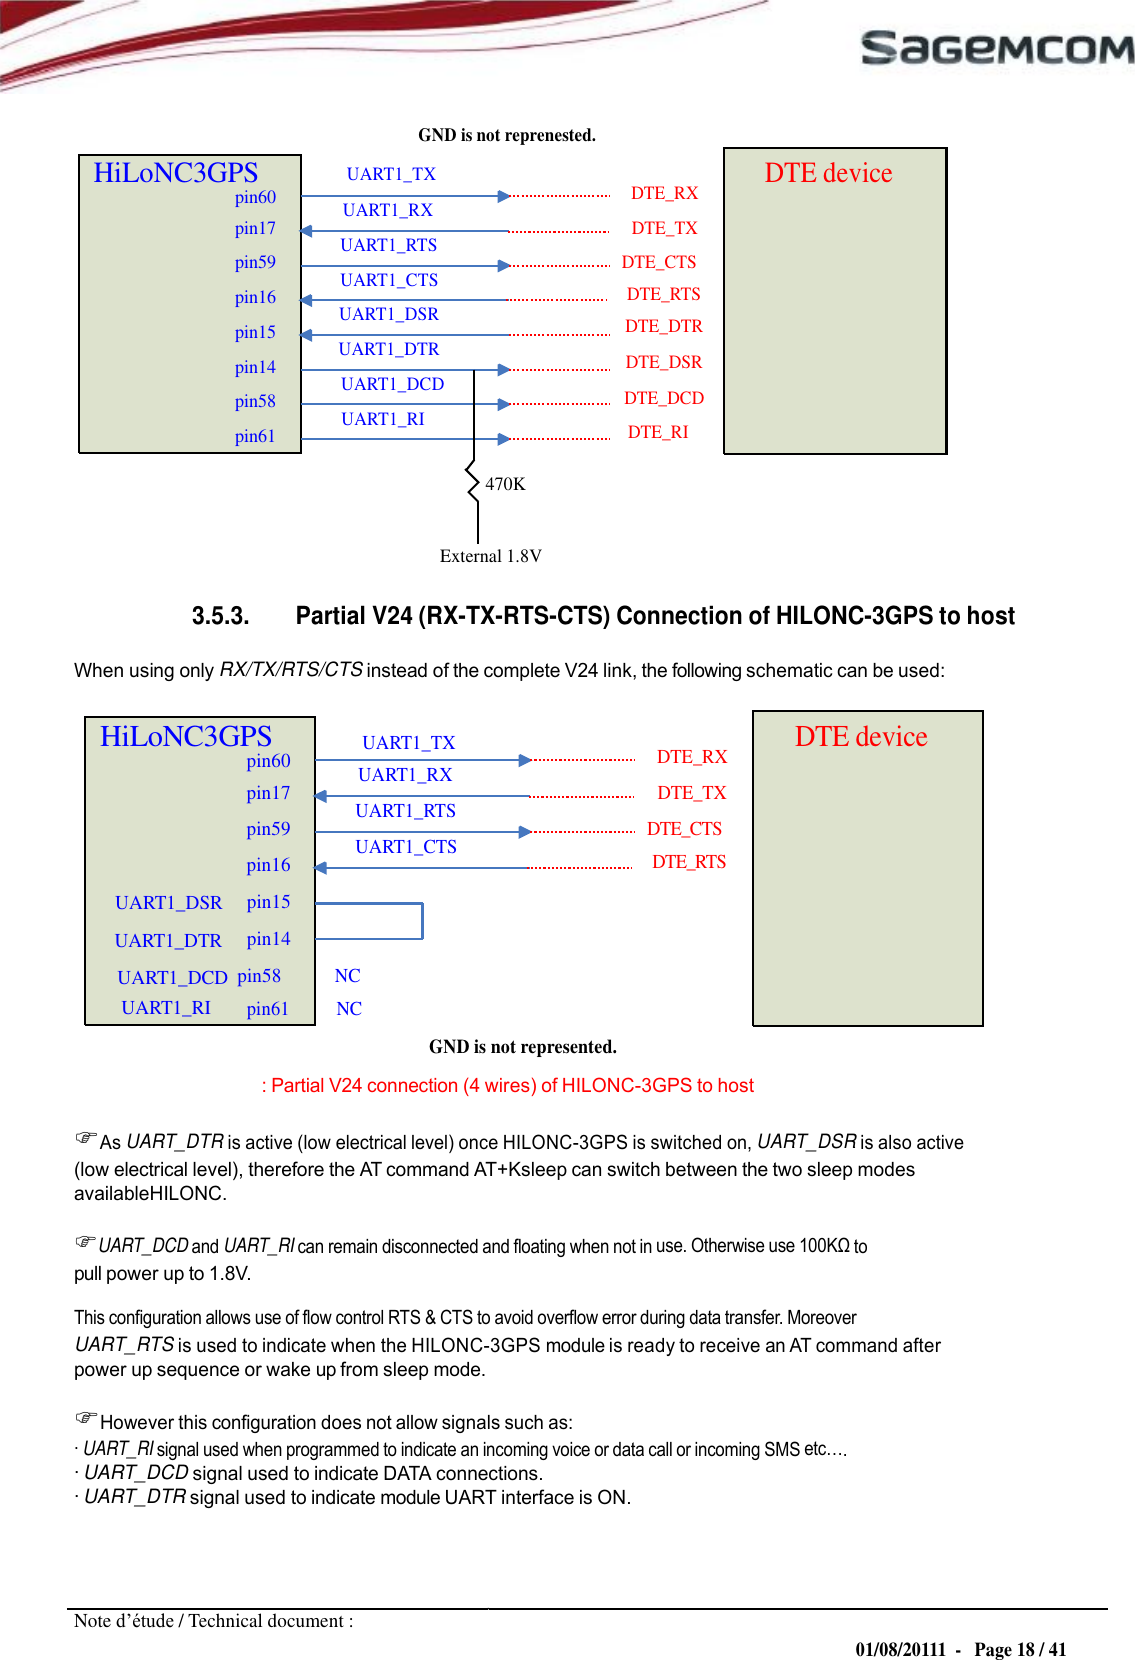  URD1– OTL 5696.1– 022 /  72740  Edition 0.4 HILONC- 3GPS APPLICATION NOTE       GND is not reprenested. HiLoNC3GPS pin60 pin17 pin59 pin16 pin15 pin14 pin58 pin61 UART1_TX UART1_RX UART1_RTS UART1_CTS UART1_DSR UART1_DTR UART1_DCD UART1_RI  DTE_RX DTE_TX DTE_CTS DTE_RTS DTE_DTR DTE_DSR DTE_DCD DTE_RI DTE device  470K   External 1.8V  3.5.3. Partial V24 (RX-TX-RTS-CTS) Connection of HILONC-3GPS to host  When using only RX/TX/RTS/CTS instead of the complete V24 link, the following schematic can be used:  HiLoNC3GPS pin60 pin17 pin59 pin16   UART1_TX UART1_RX UART1_RTS UART1_CTS   DTE_RX DTE_TX DTE_CTS DTE_RTS  DTE device UART1_DSR pin15 UART1_DTR pin14 UART1_DCD  pin58 NC UART1_RI pin61 NC GND is not represented. : Partial V24 connection (4 wires) of HILONC-3GPS to host  As UART_DTR is active (low electrical level) once HILONC-3GPS is switched on, UART_DSR is also active (low electrical level), therefore the AT command AT+Ksleep can switch between the two sleep modes availableHILONC.  UART_DCD and UART_RI can remain disconnected and floating when not in use. Otherwise use  to pull power up to 1.8V. This configuration allows use of flow control RTS &amp; CTS to avoid overflow error during data transfer. Moreover UART_RTS is used to indicate when the HILONC-3GPS module is ready to receive an AT command after power up sequence or wake up from sleep mode.  However this configuration does not allow signals such as: · UART_RI signal used when programmed to indicate an incoming voice or data call or incoming SMS . · UART_DCD signal used to indicate DATA connections. · UART_DTR signal used to indicate module UART interface is ON.     Note d’étude / Technical document : 01/08/20111  -   Page 18 / 41 